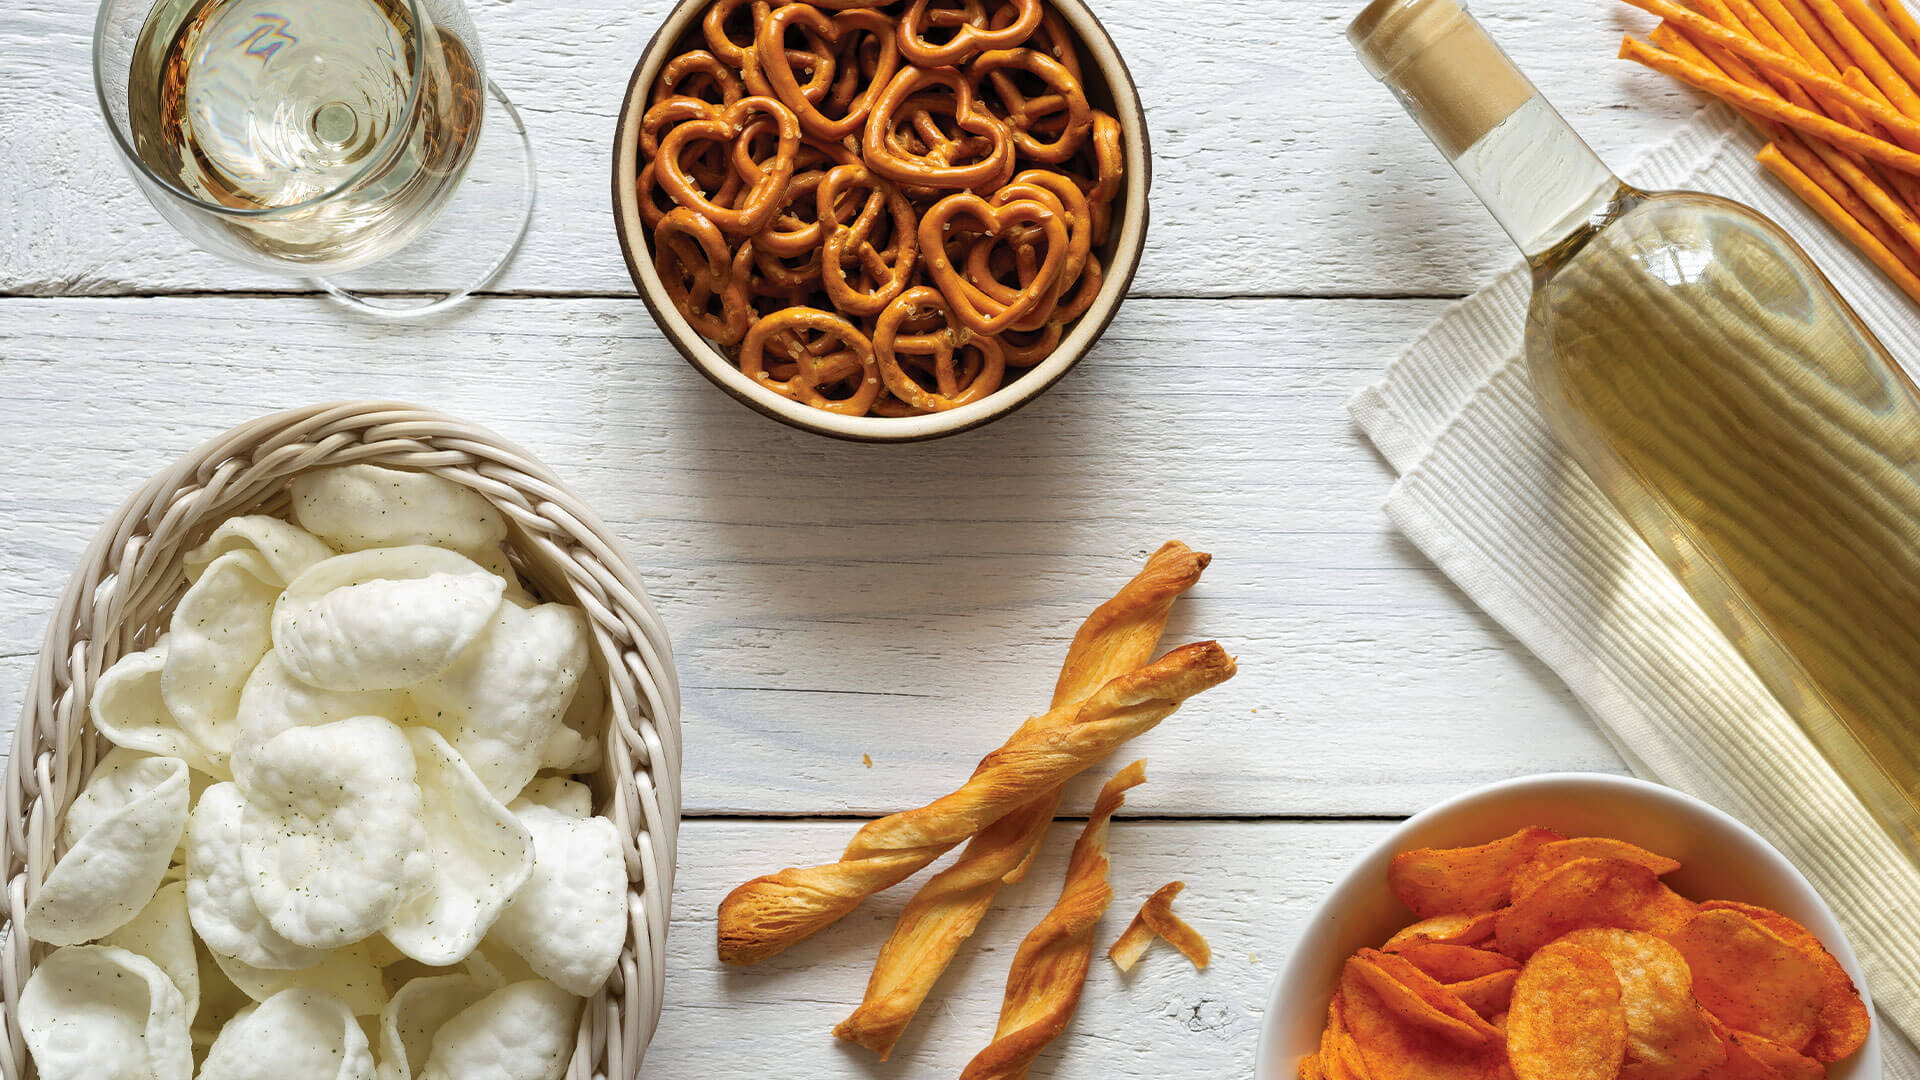 White wine pairing with chips and pretzels.